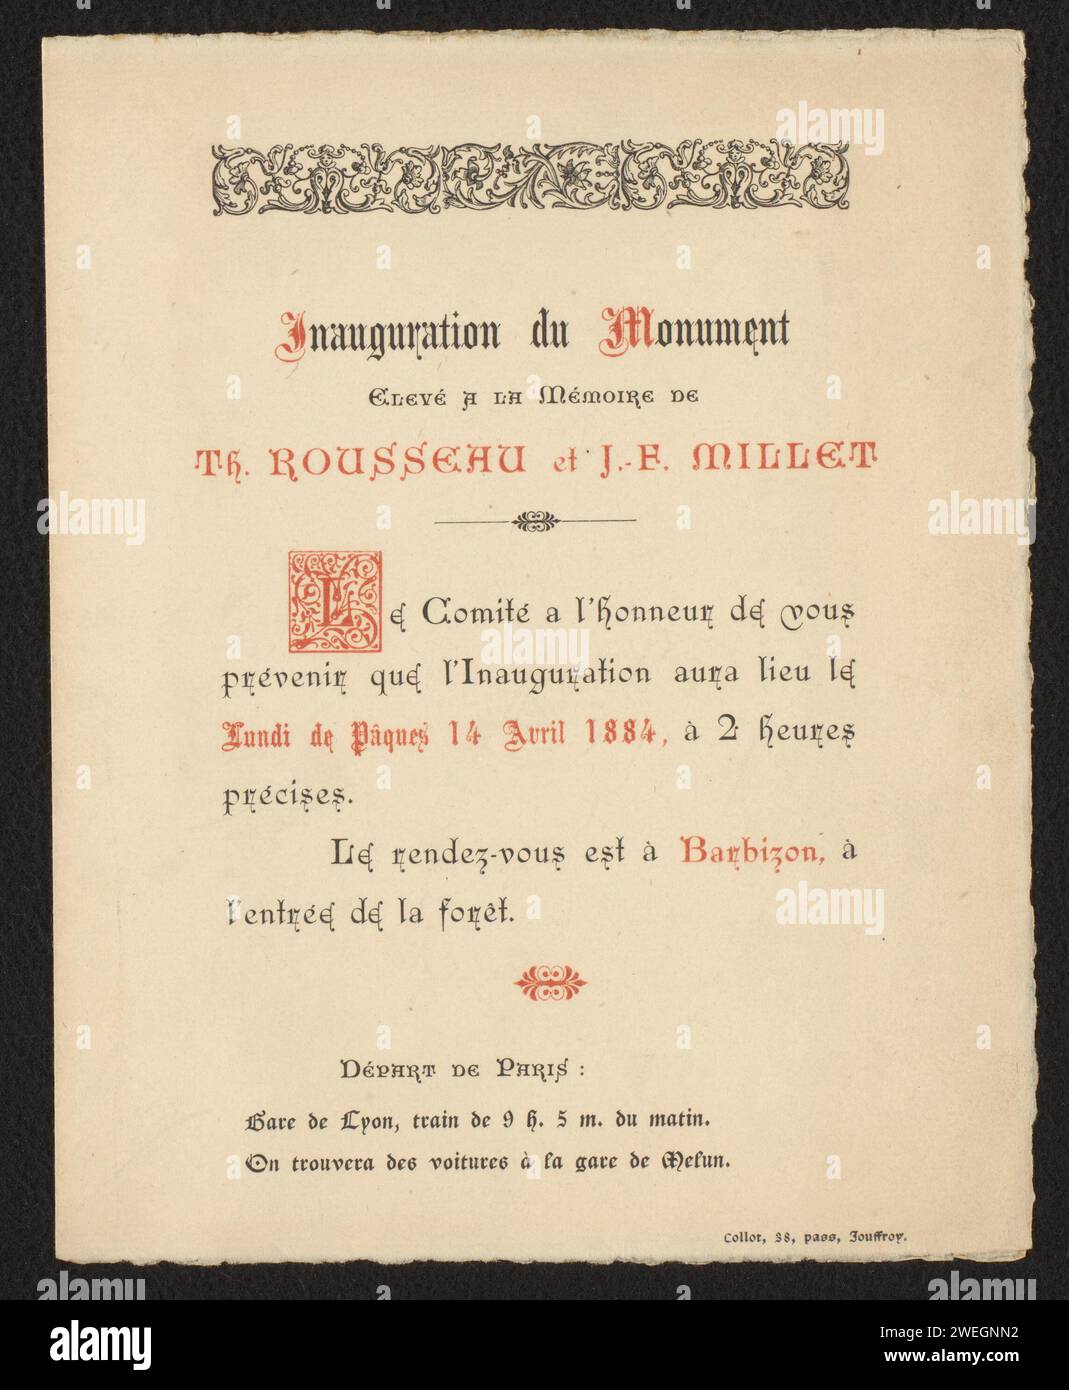 Invitation to the inauguration of the Stele in honor of Théodore Rousseau and Jean-François Millet, Anonymous, Before 1884 text sheet. photomechanical print Initial 'L' and small decorative elements in the text.  paper letterpress printing / printing block printed matter. fancy letters Barbizon Stock Photo